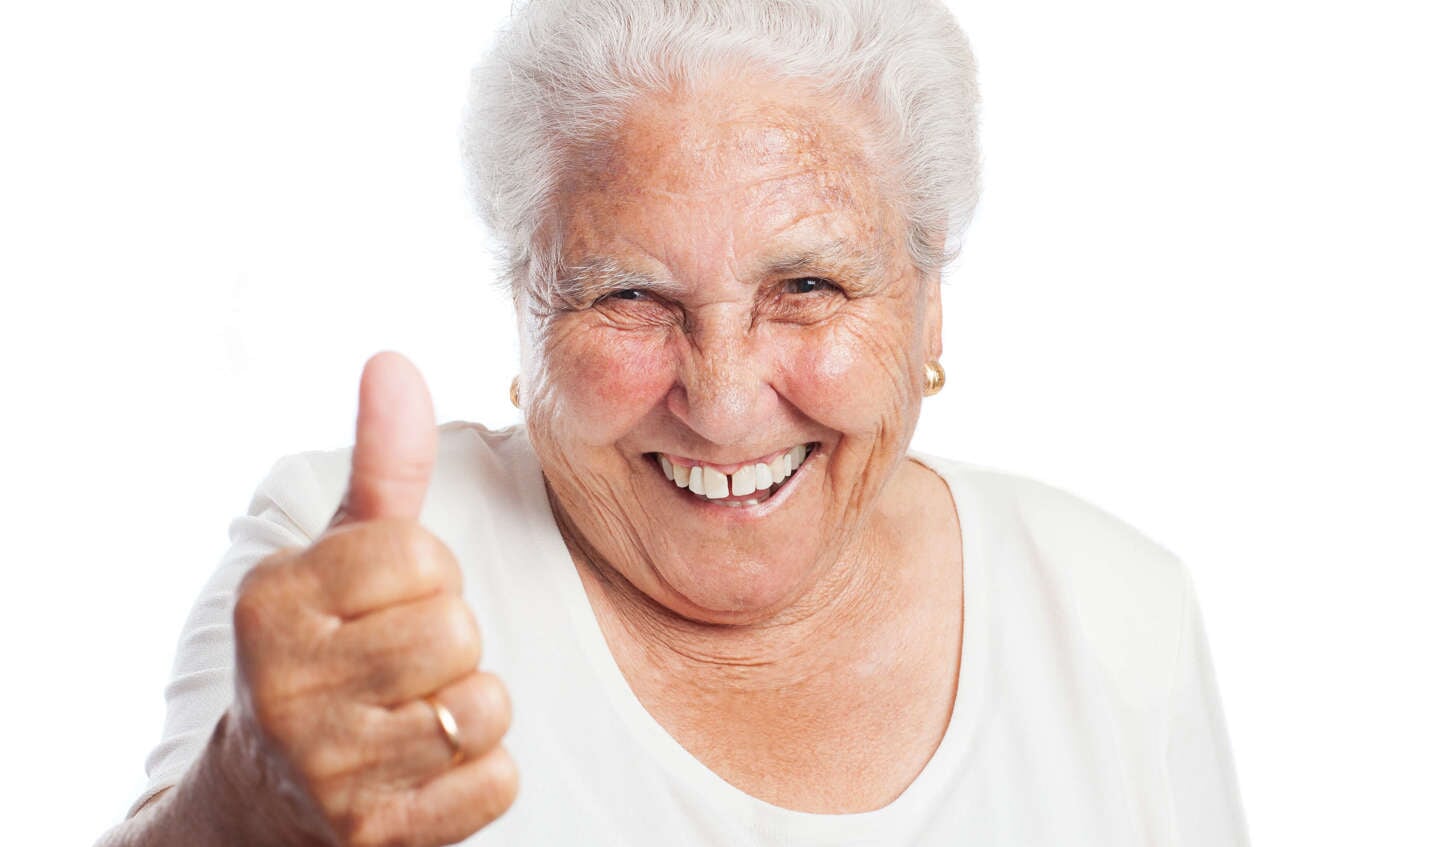 |||||||||||||||||||||||||||||||||||||||||||||||||||old woman thumb up on a white background||||||||